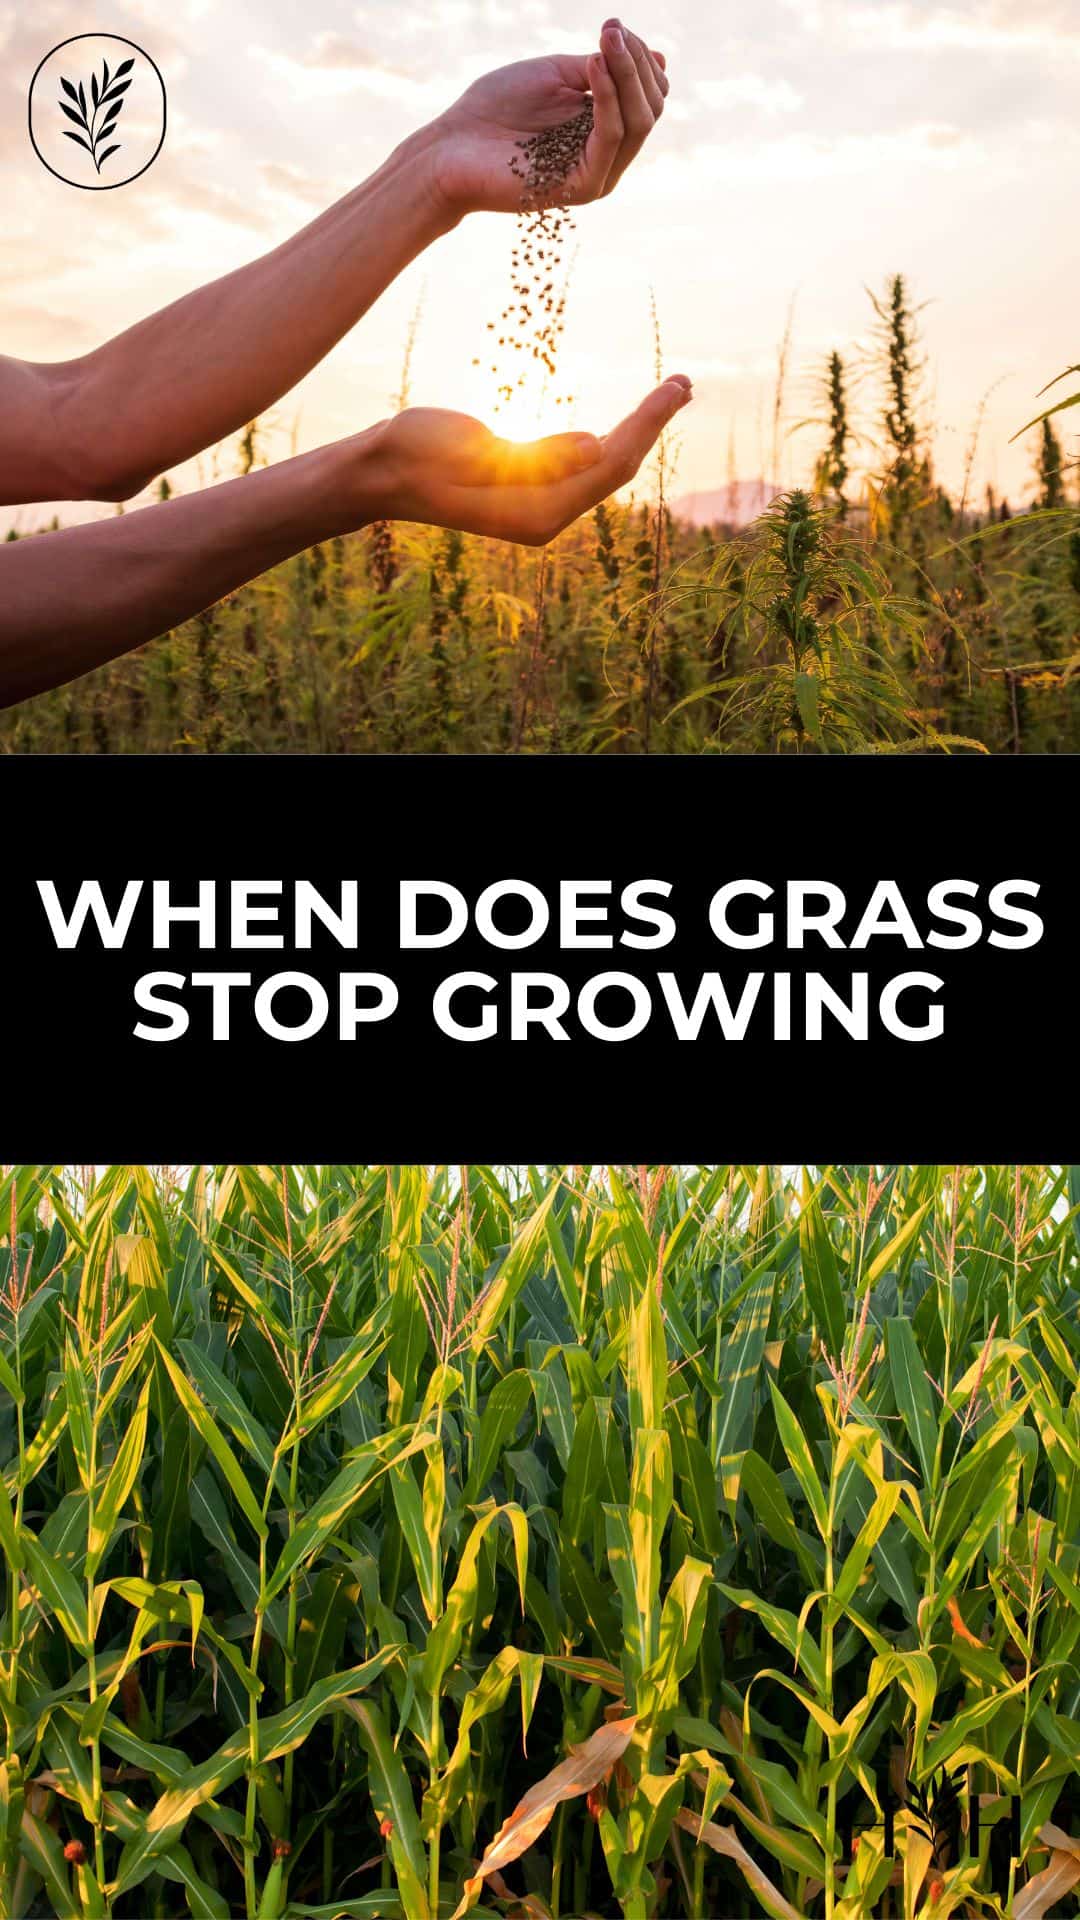 When does grass stop growing via @home4theharvest